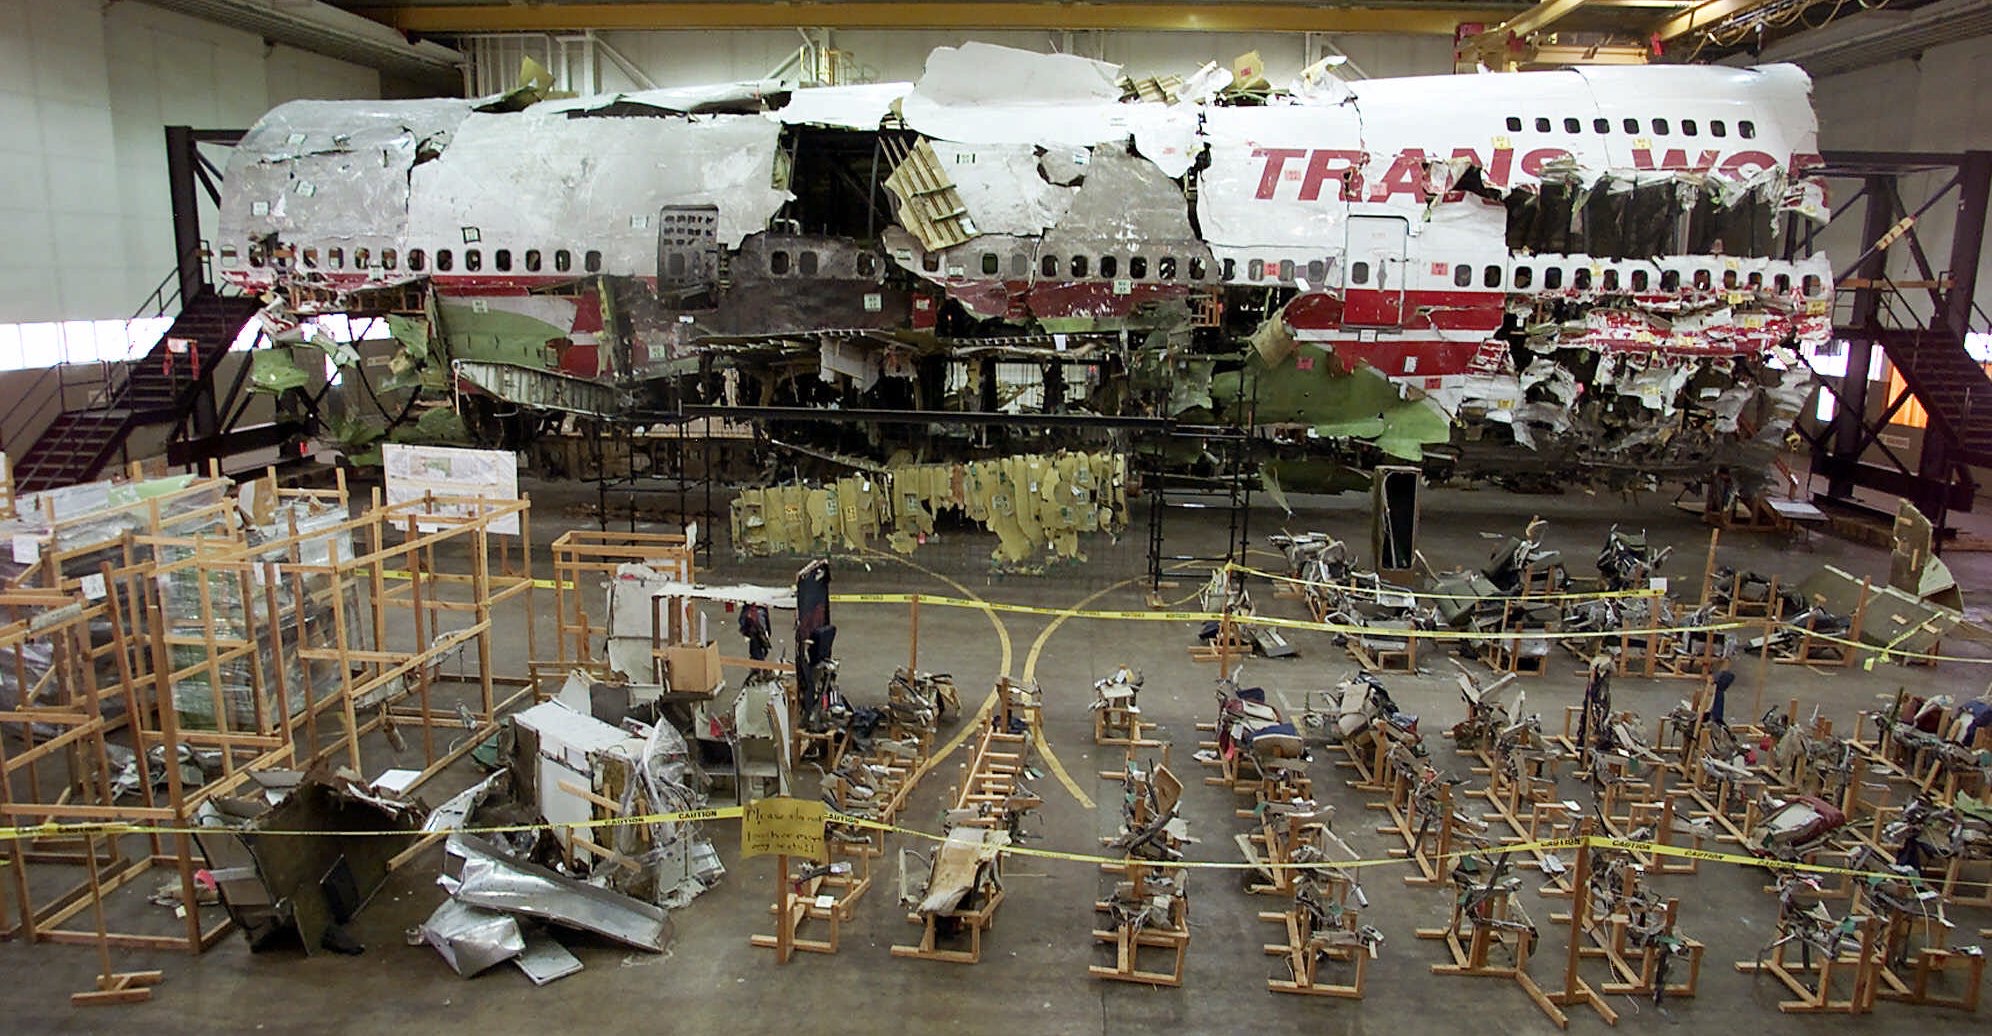 NTSB Announces Plan to Decommission and Destroy TWA Flight 800 – FlyerTalk  - The world's most popular frequent flyer community